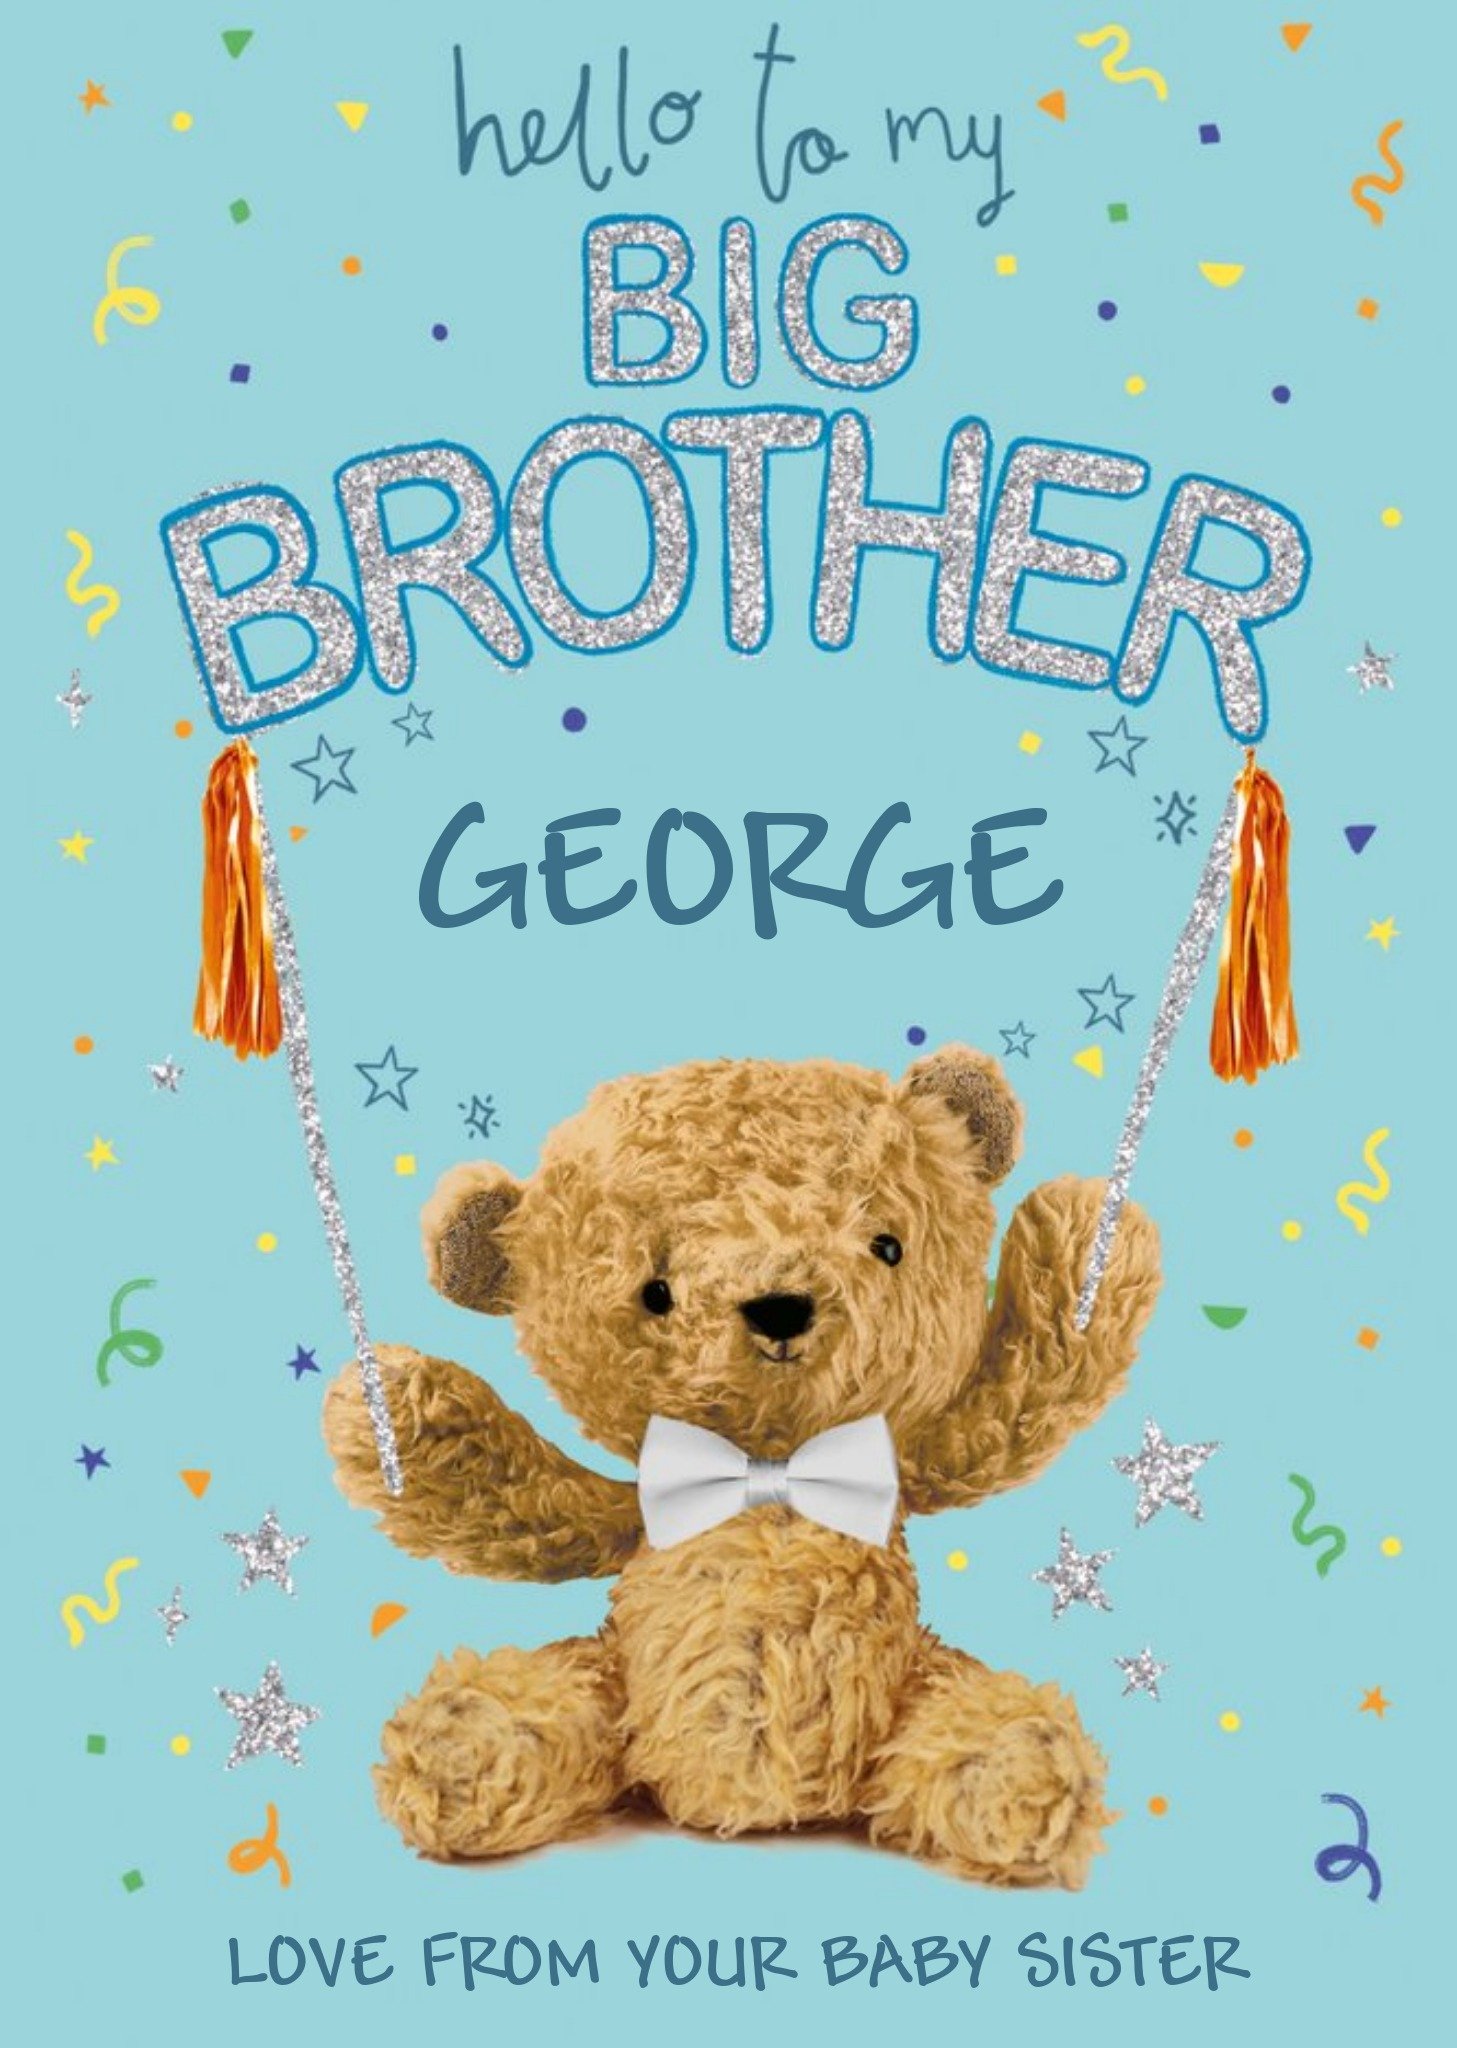 Moonpig Blue Illustrated Teddy Bear Customisable Hello To My Big Brother Card, Large